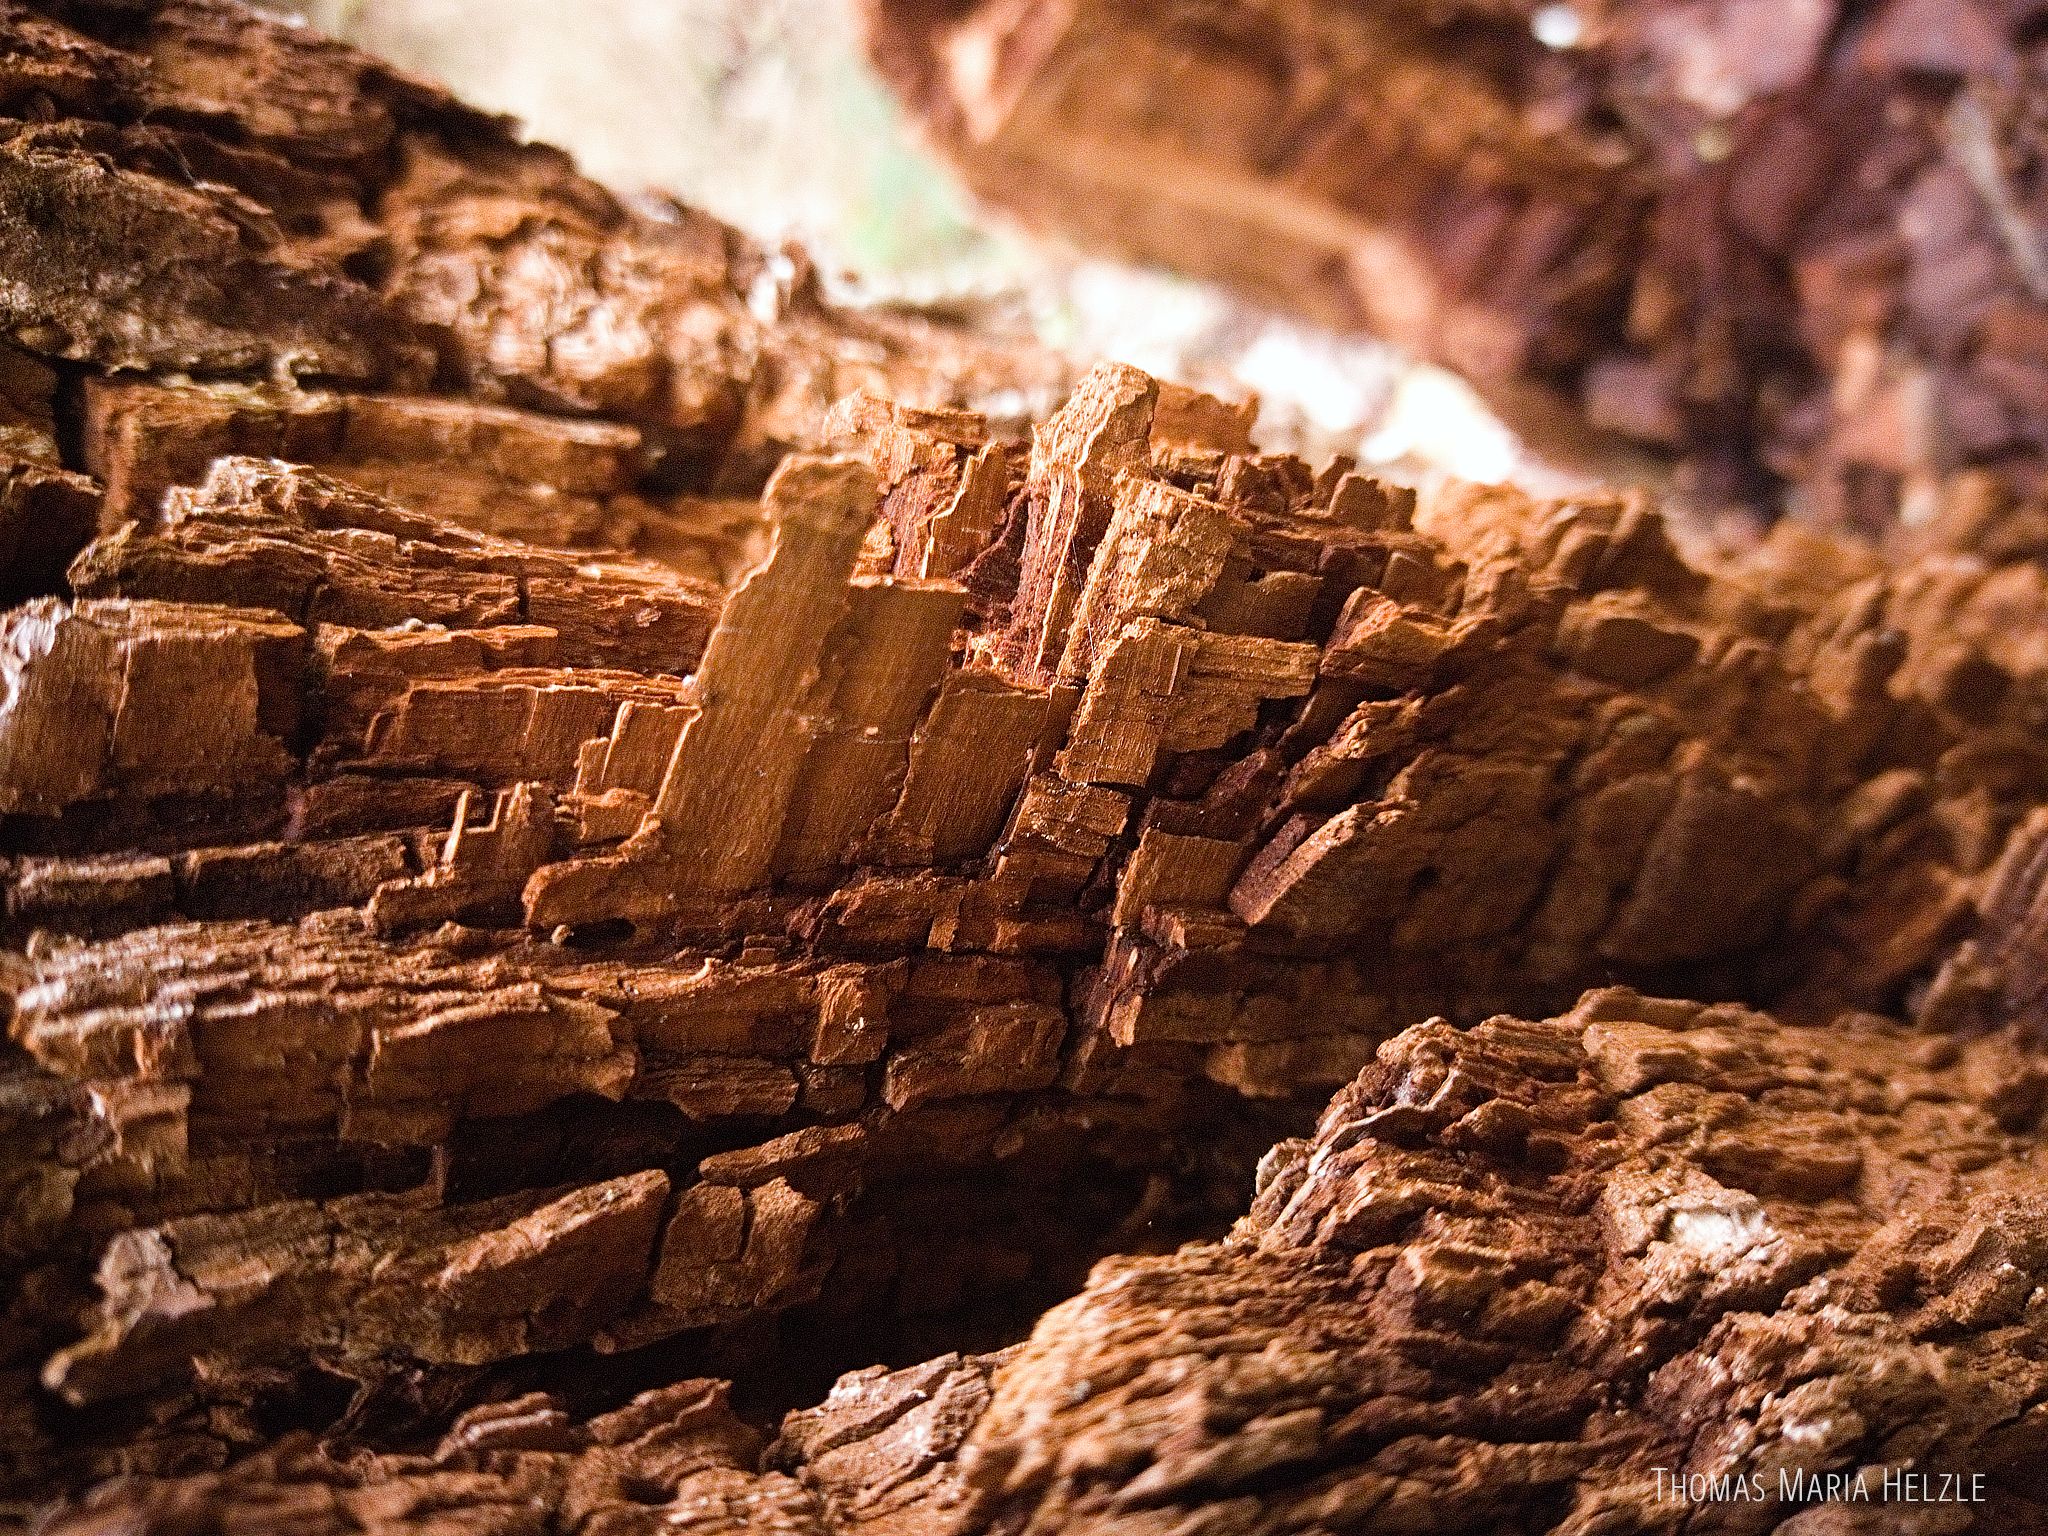 Another macro of the rotten wood of a very old and huge oak tree. The wood decays into small rectangular pieces that form fascinating structures, this one looks like some kind of cubic town or a container shipyard.